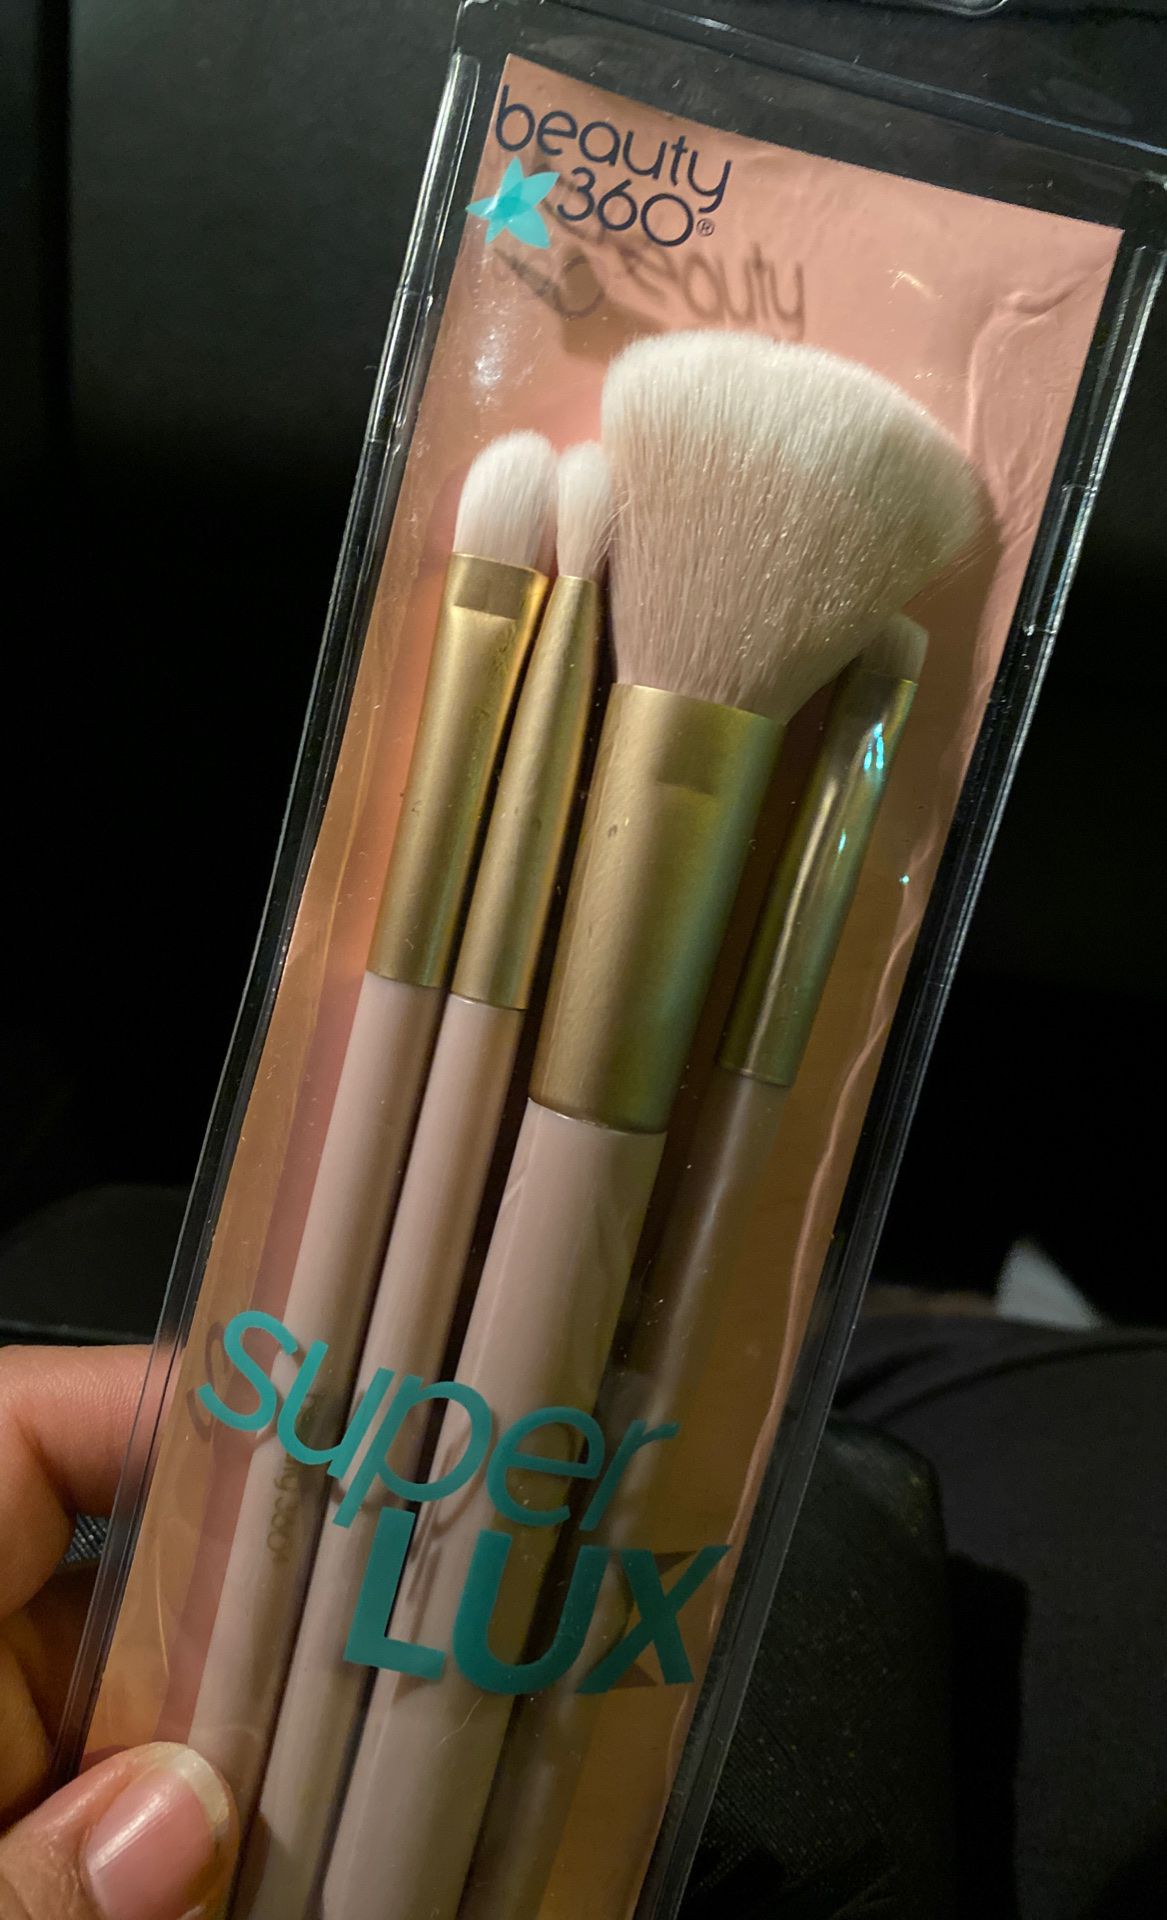 Beauty 360 makeup brushes